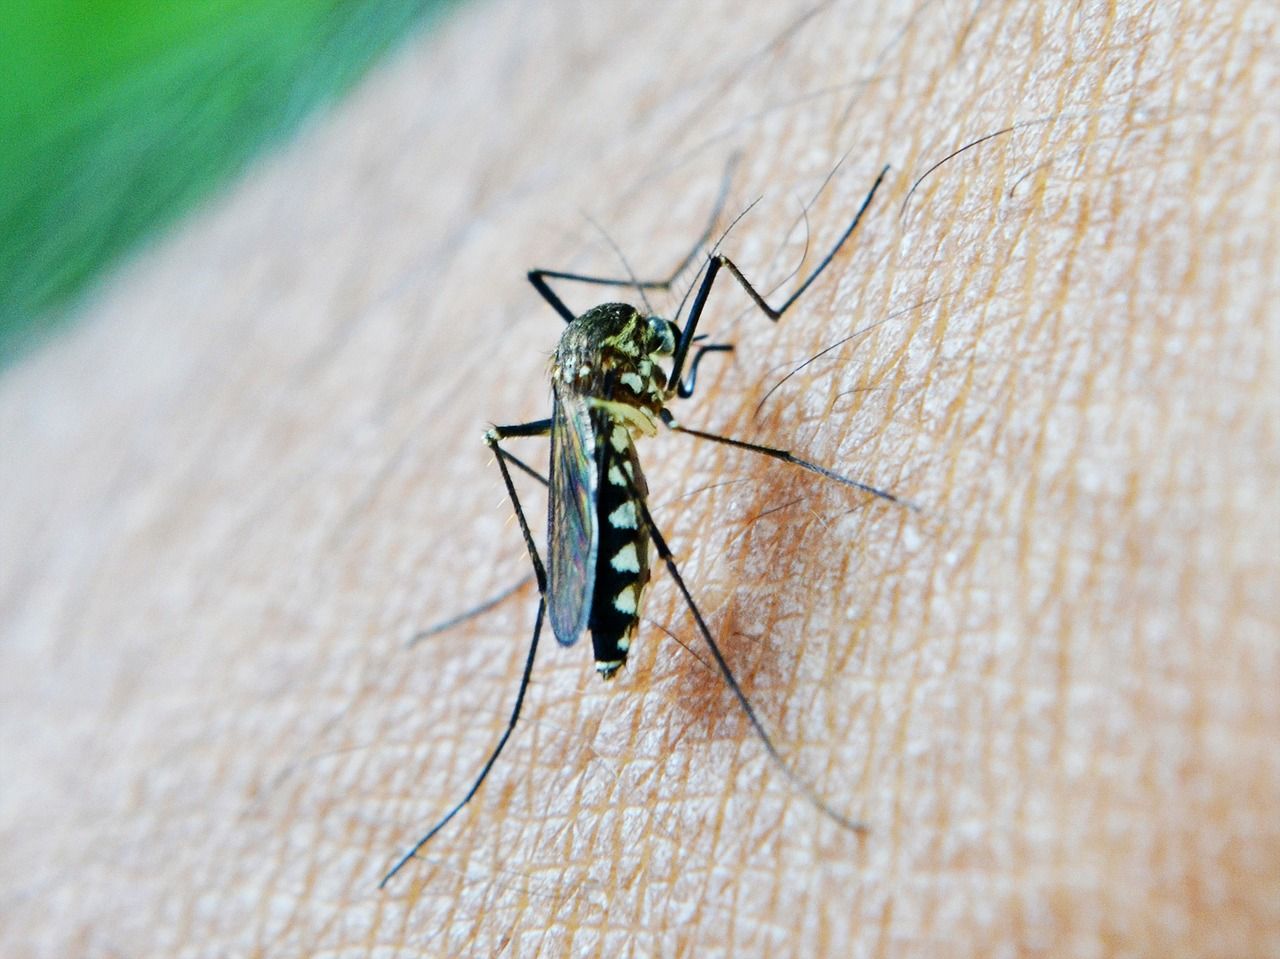 Maryland Reports First Case Of Locally Acquired Malaria After 40 Years; Know All About The Disease